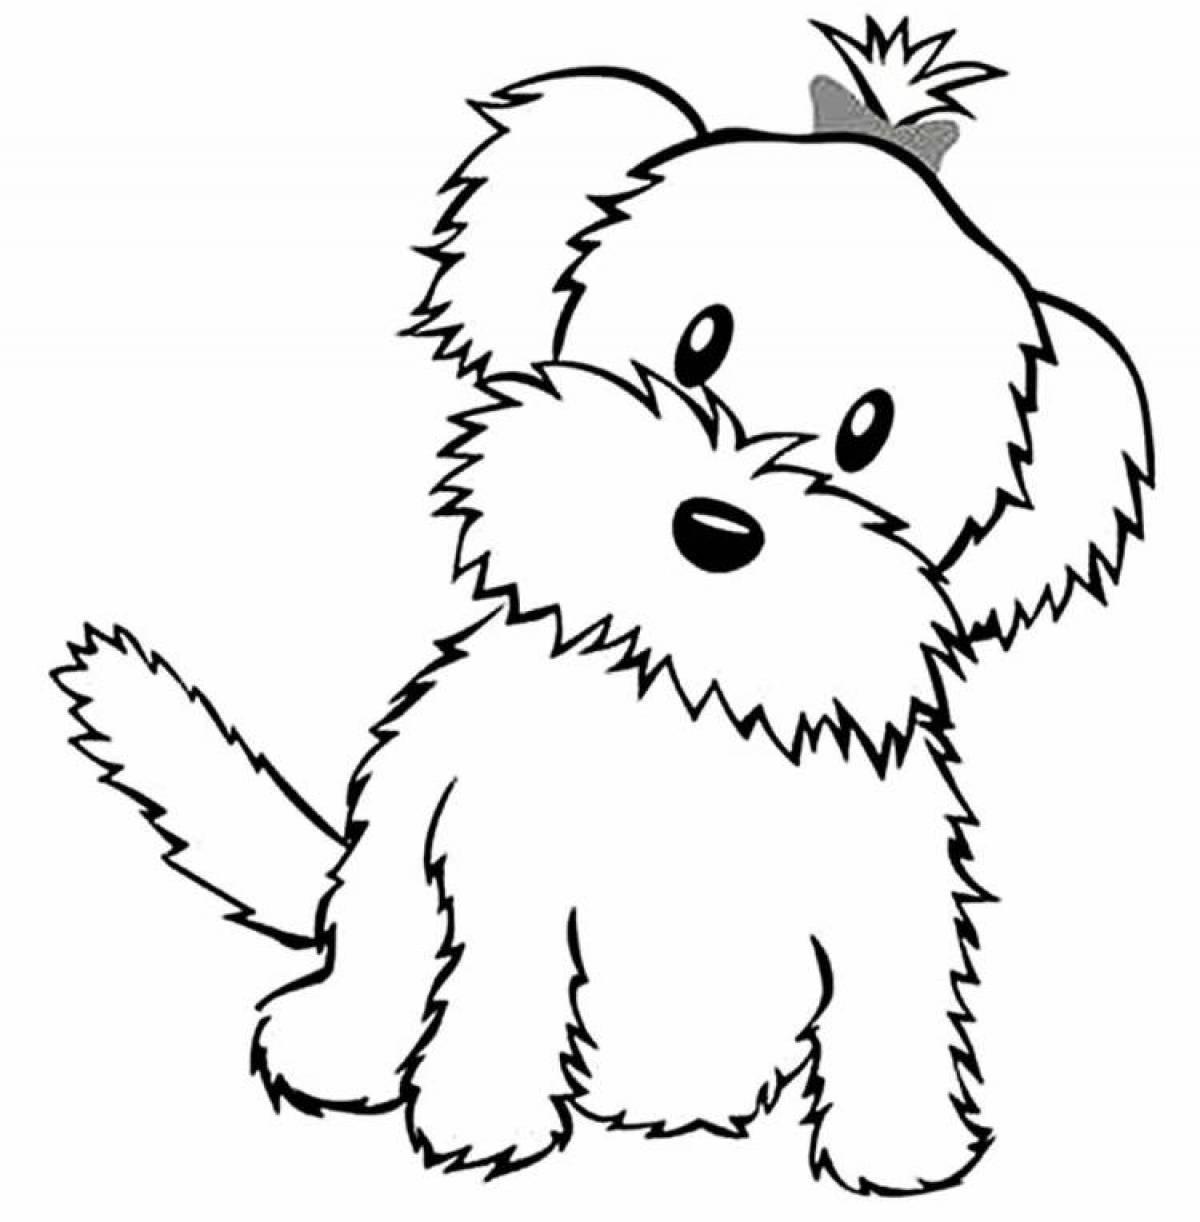 Snuggly coloring page dog